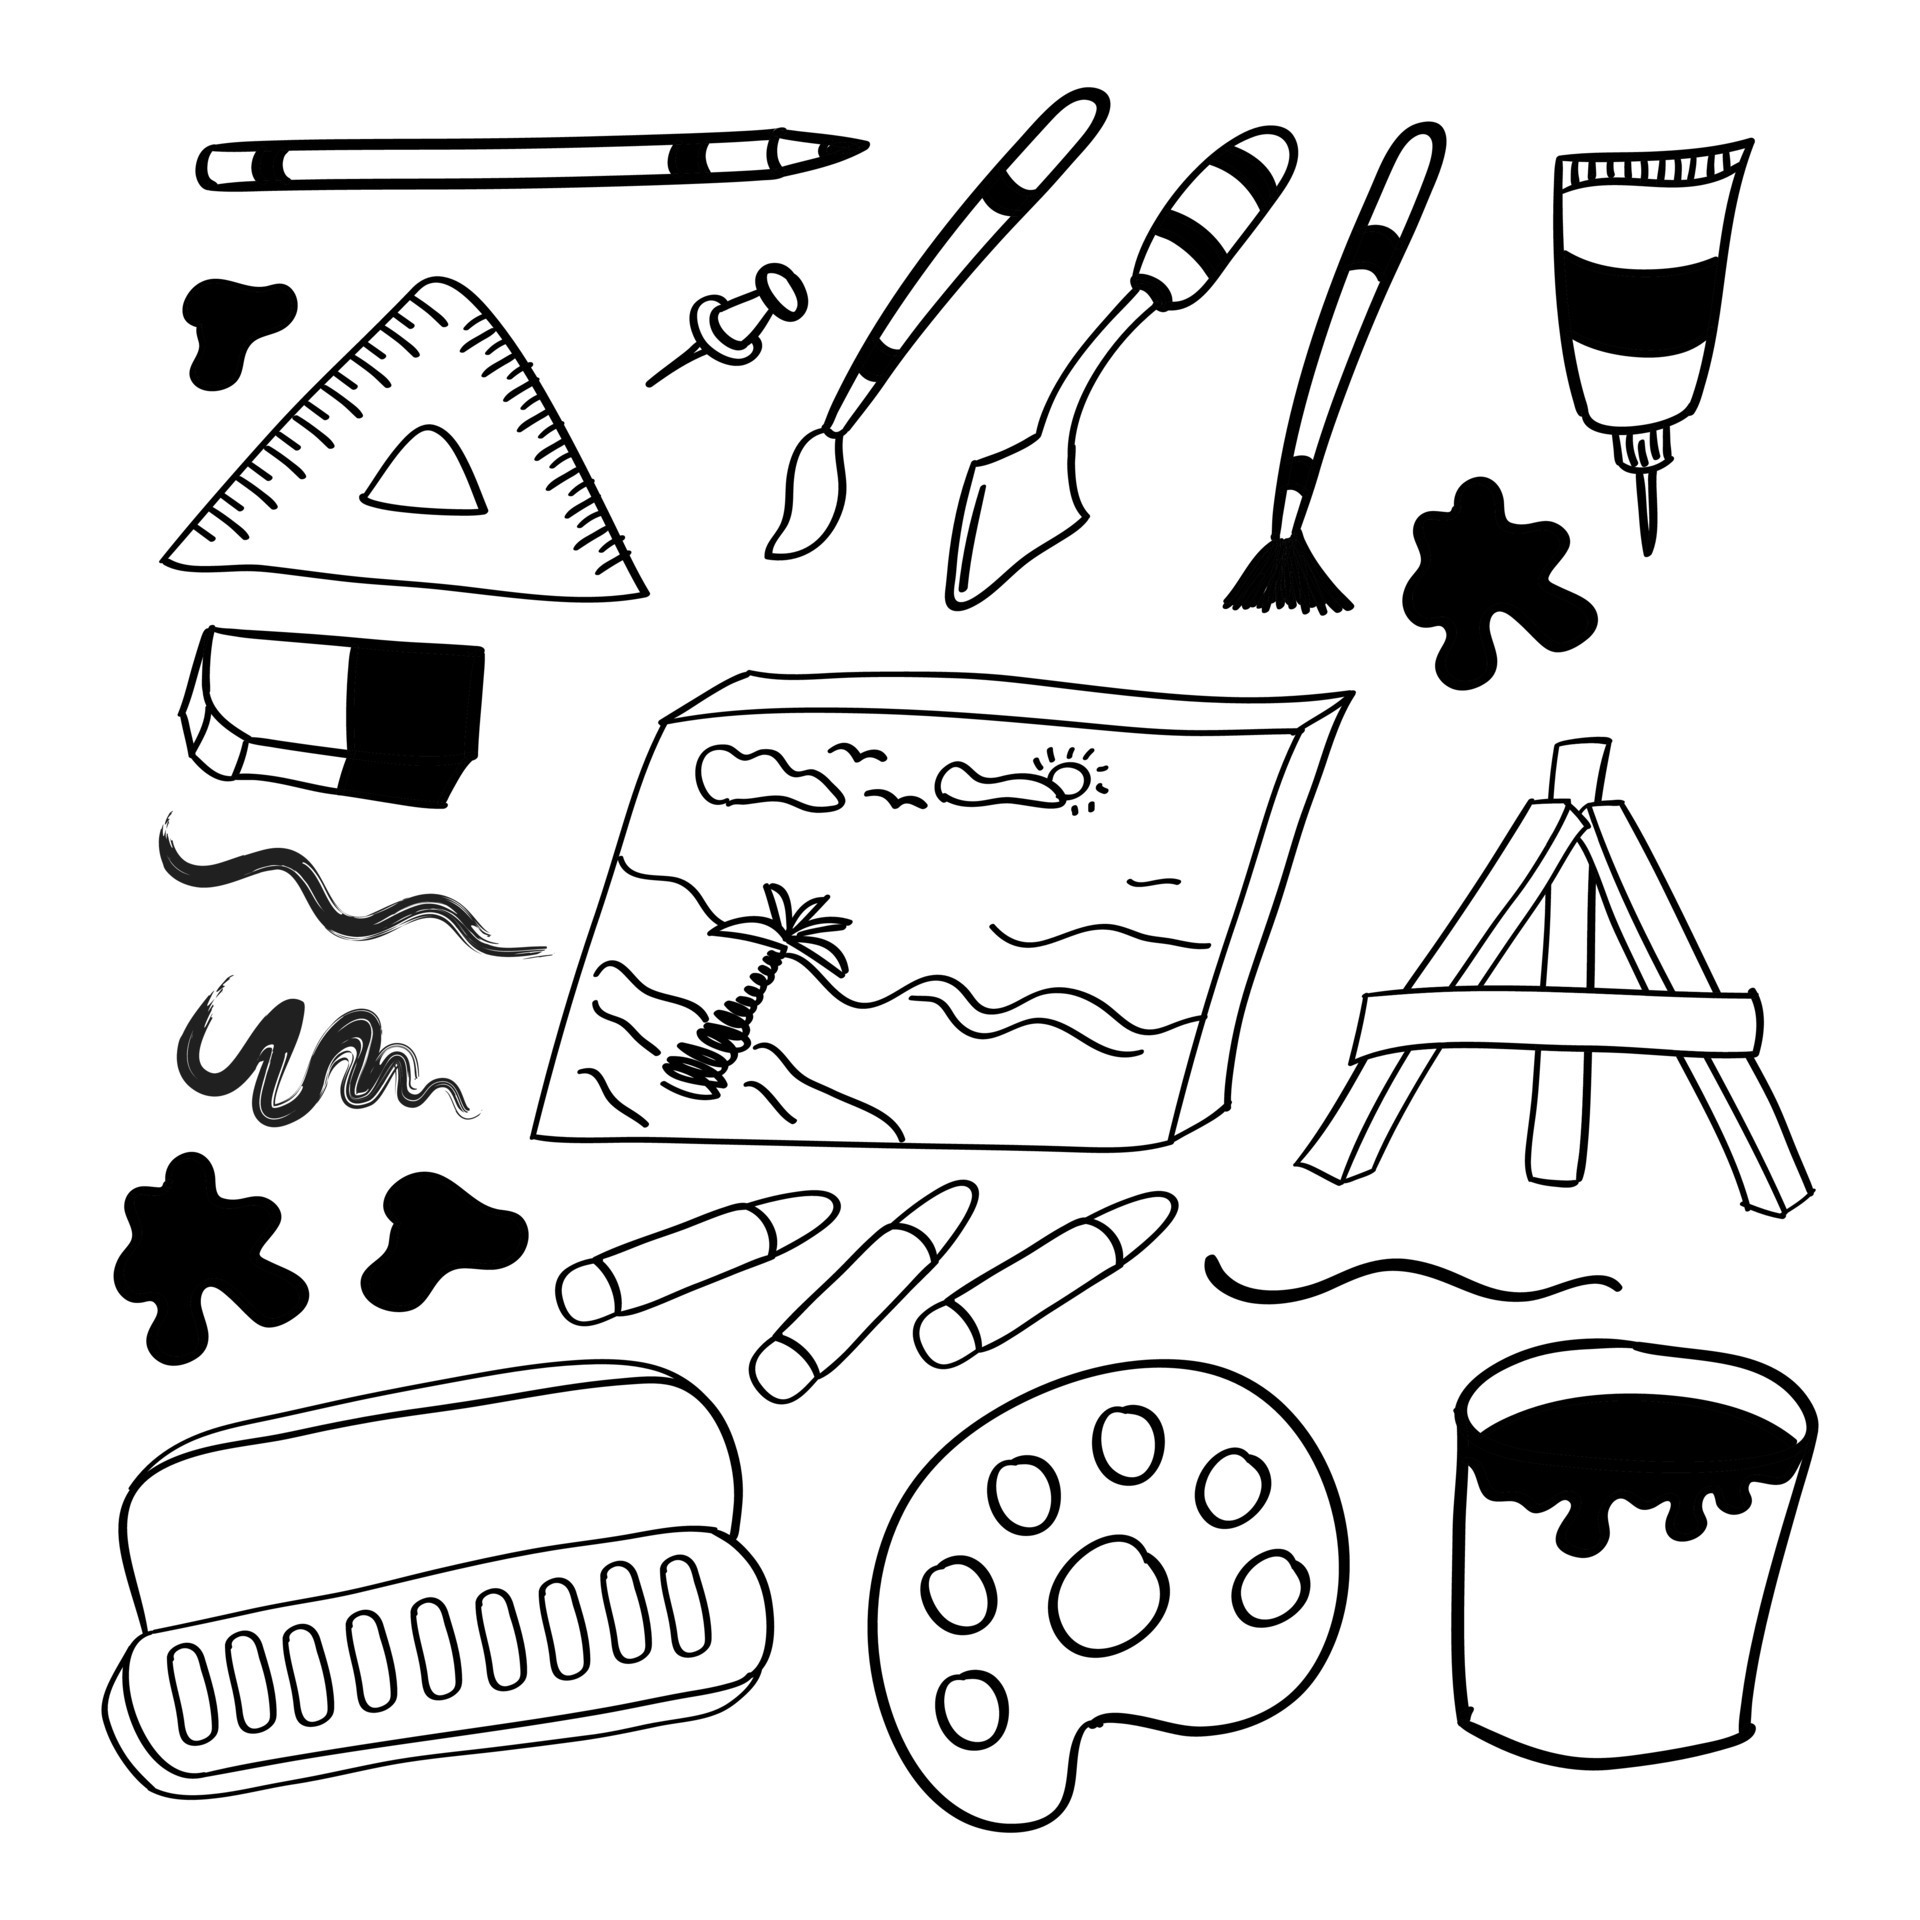 https://static.vecteezy.com/system/resources/previews/012/911/095/original/hand-drawn-artist-tools-icon-in-doodle-style-vector.jpg